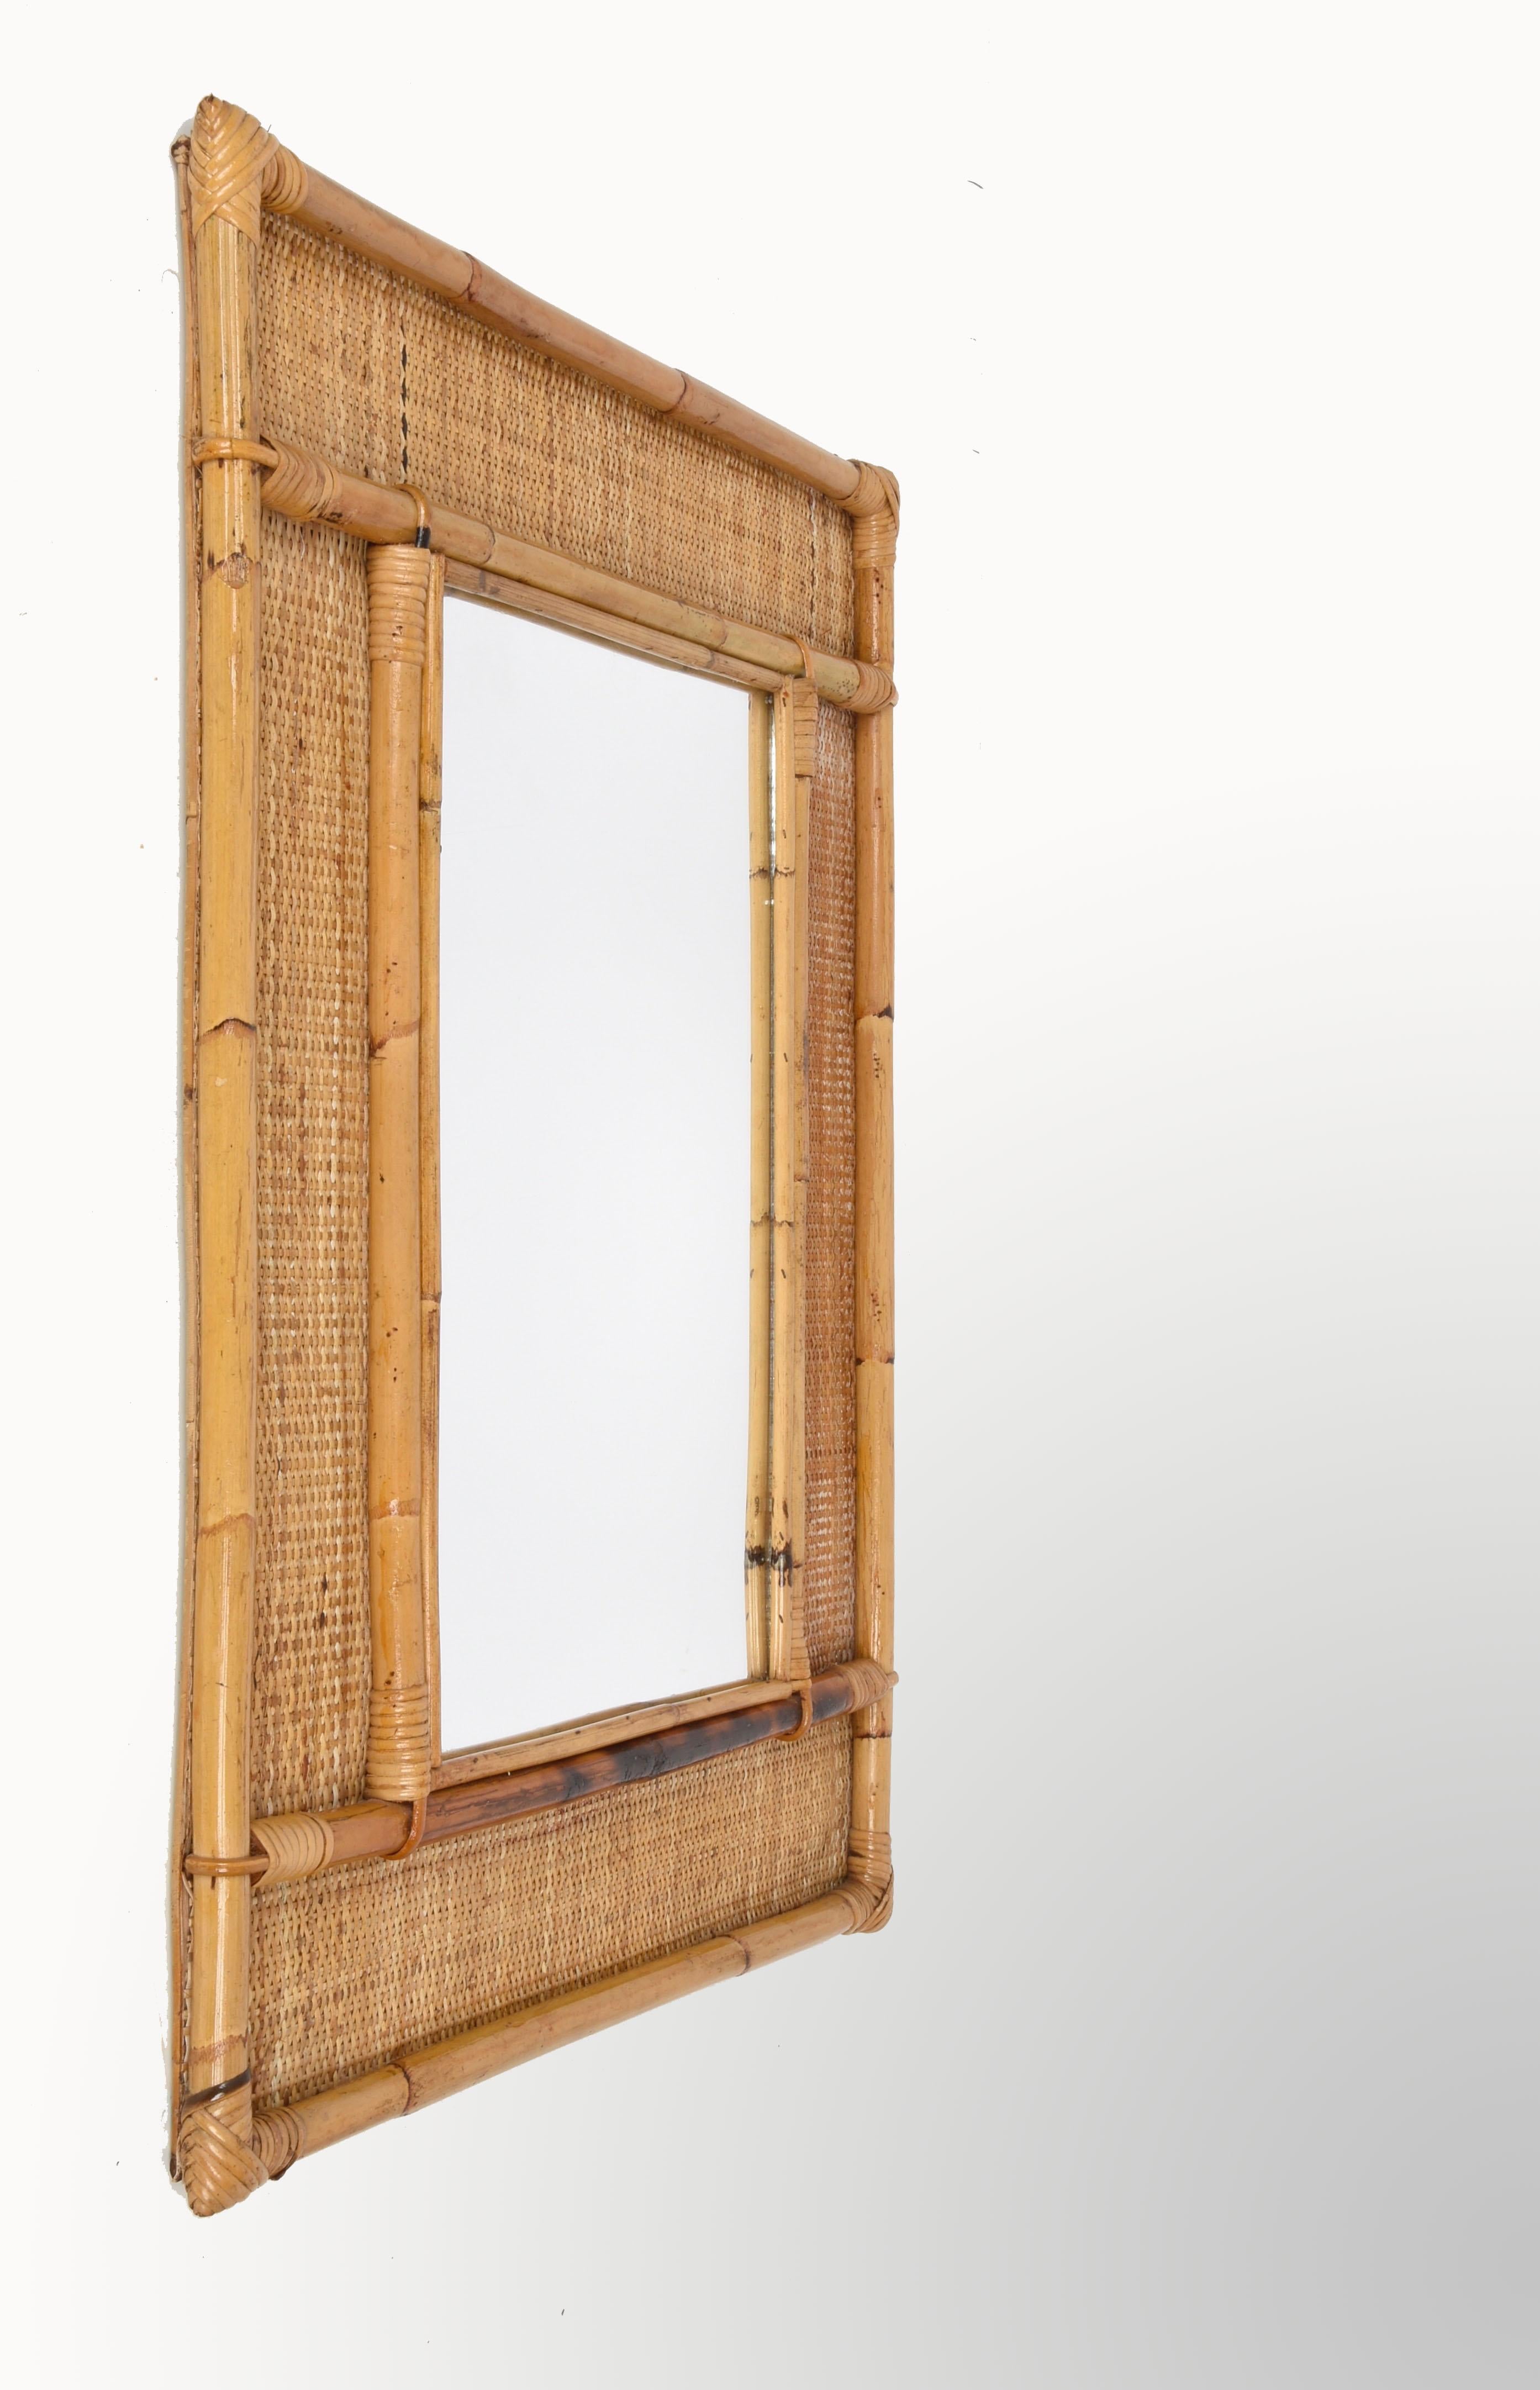 Spectacular midcentury rectangular bamboo and woven wicker mirror. This amazing item was produced in Italy during the 1970s.

This piece is wonderful because of the complex frame, as it has an internal and external part made of small bamboo canes,